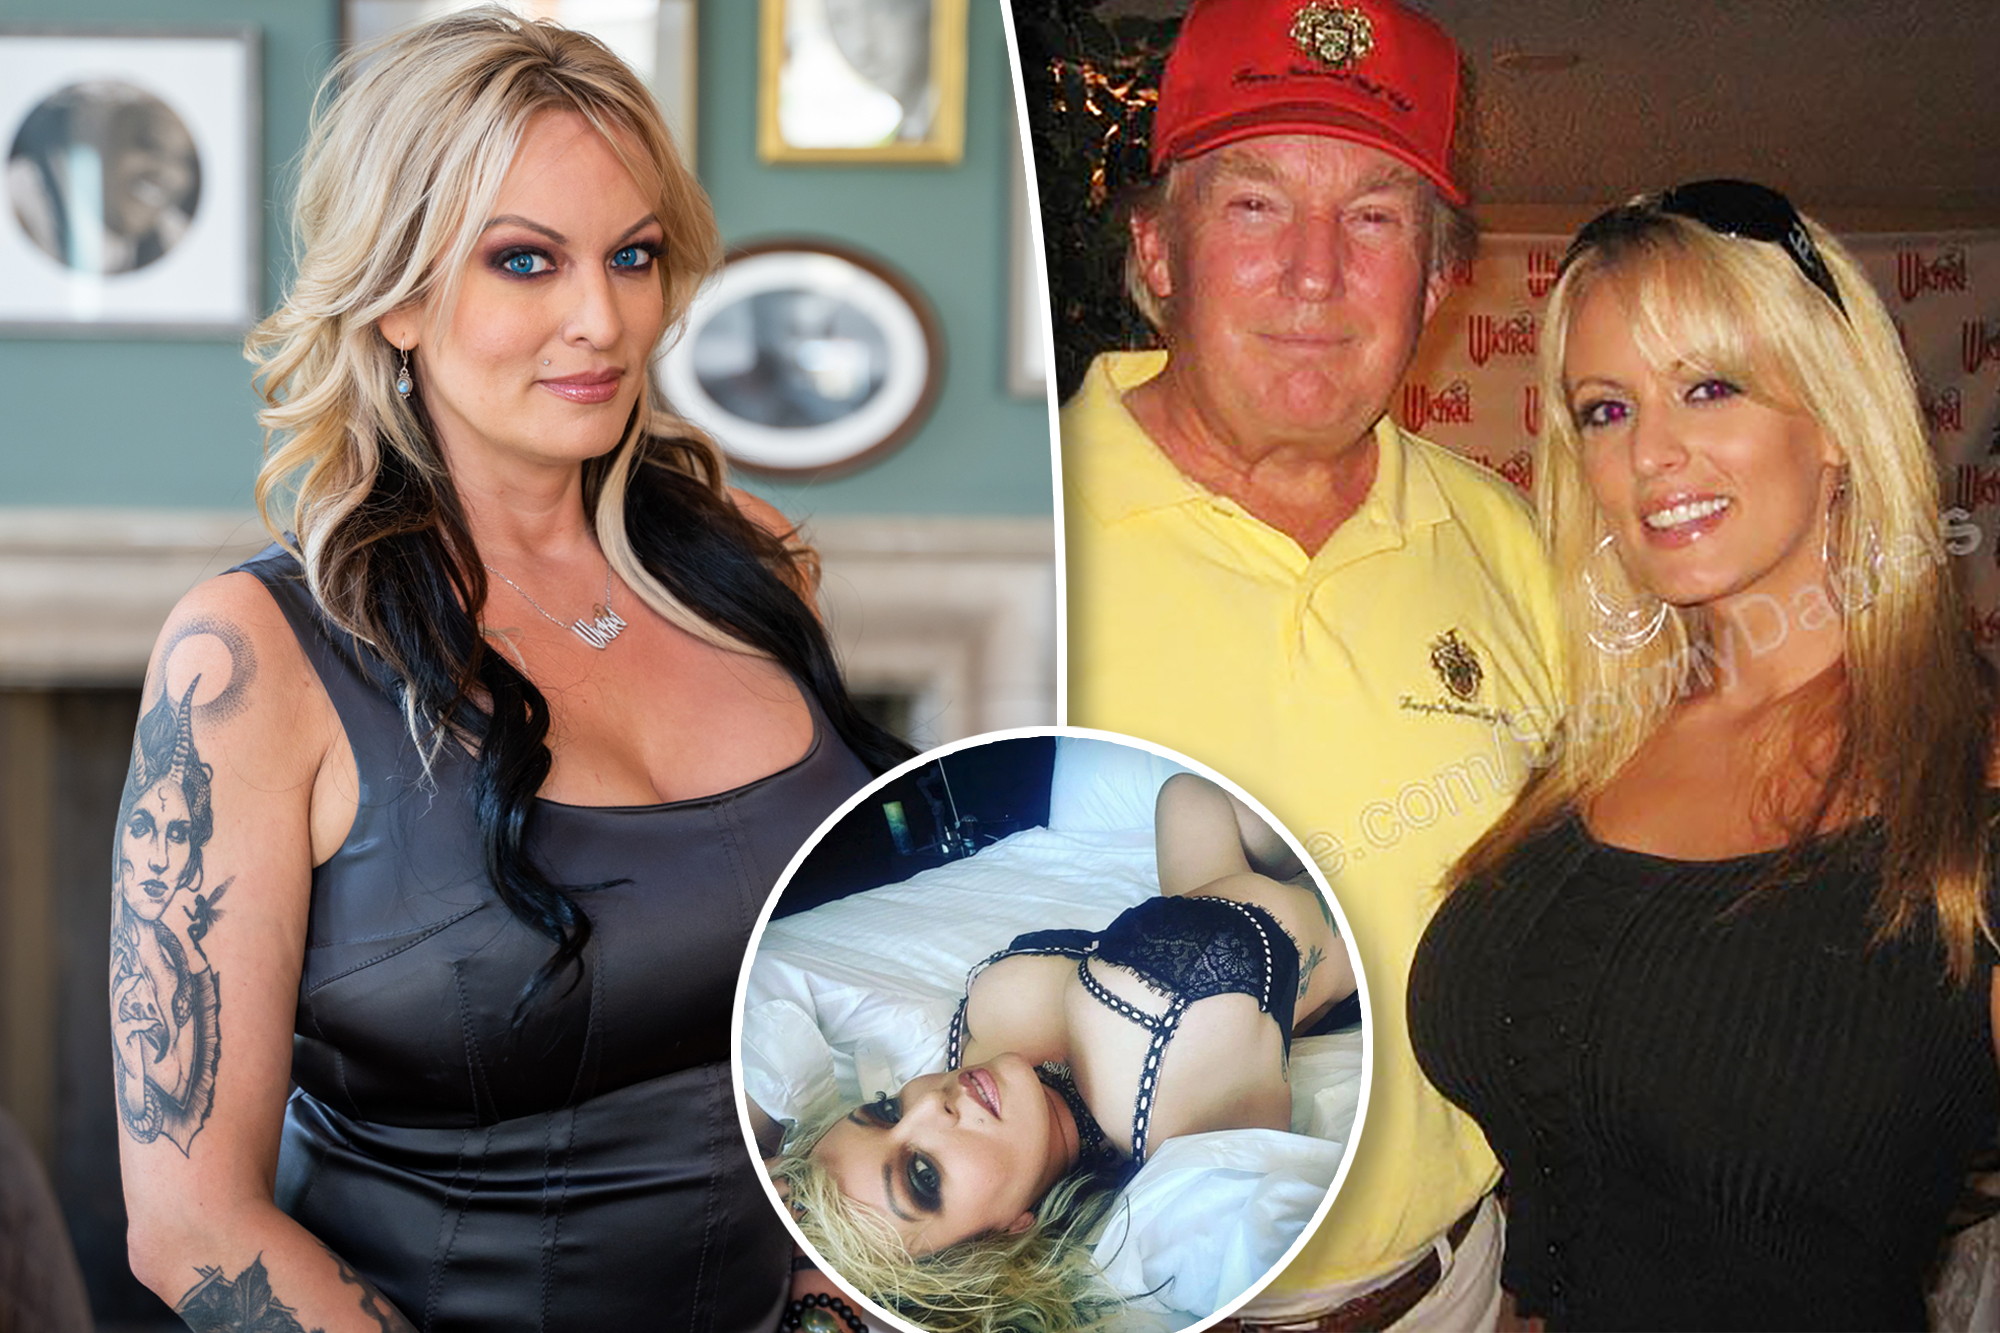 christian roderick share stormy daniels porn pictures photos